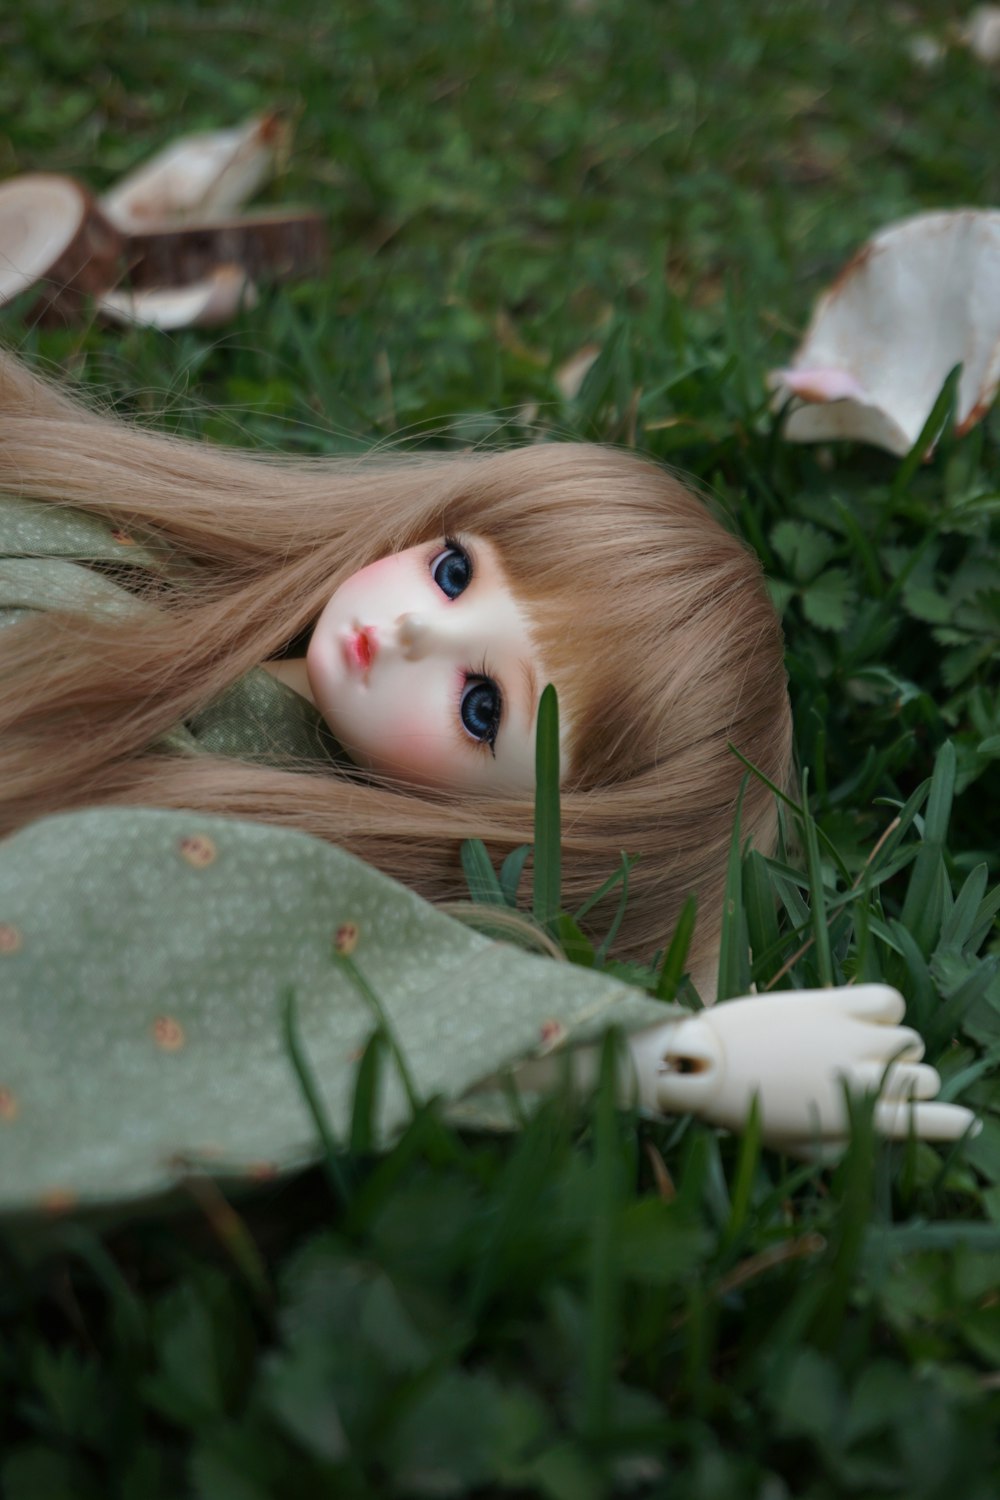 100+ Doll Pictures | Download Free Images on Unsplash